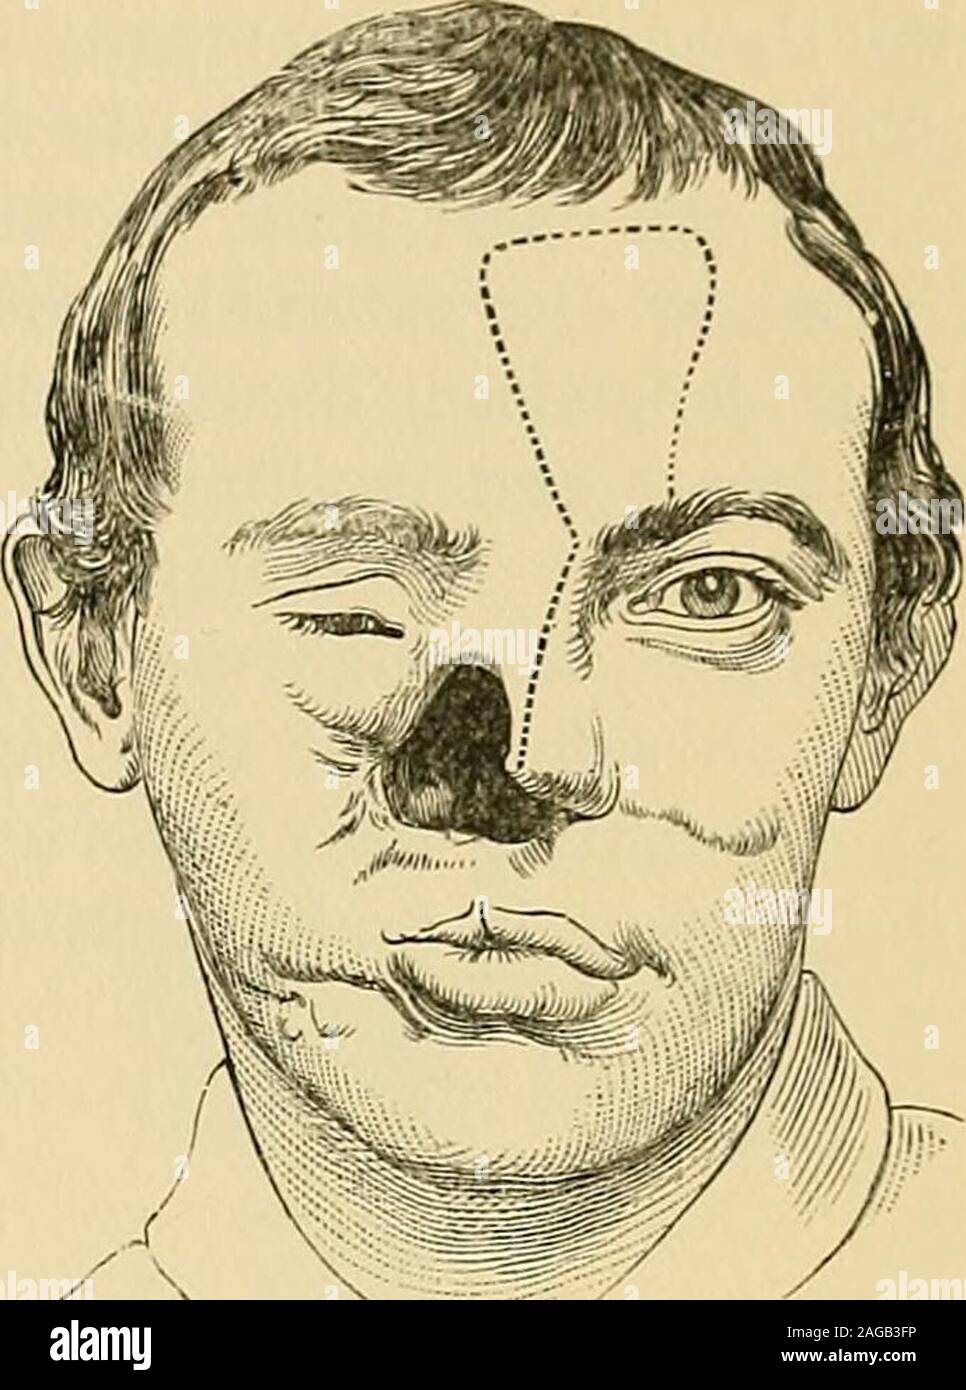 . Operative surgery. Fig. 726.—Bucks method. Fig. 727.—Bucks method. After the edges of the defect are freshened, the flap is slid carefully intothe gap and united there with horsehair sutures. Weher cured a defective ala with a flap taken from the upper lip, thepedicle being continuous with the columna. The flap was oval, included aportion of the thickness of the lip only, and was slid into the gap andunited with its freshened borders by horsehair sutures. At the end of fourweeks the pedicle was divided and turned upward to improve the sym-metry of the nose. If either ala be absent, and the r Stock Photo